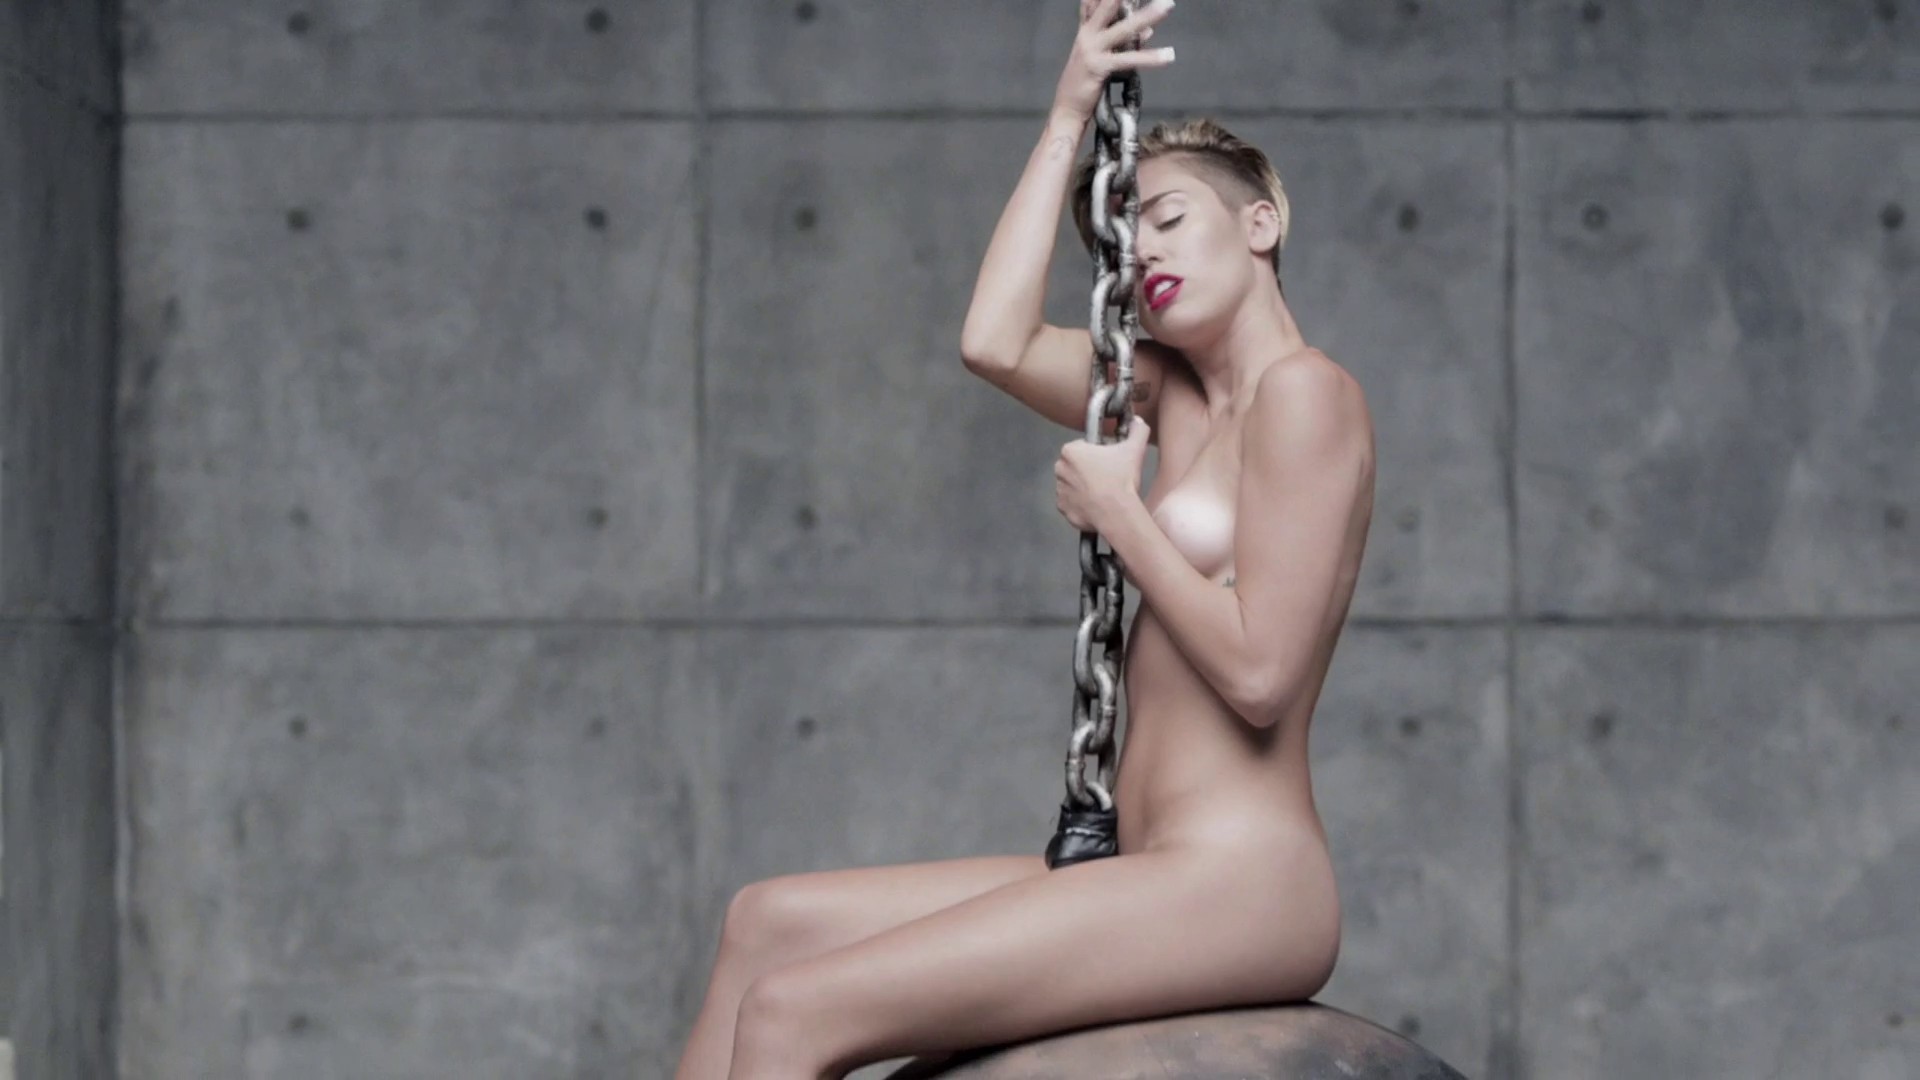 Miley Cyrus - Wrecking Ball explicit uncensored video 1080p2895.jpg